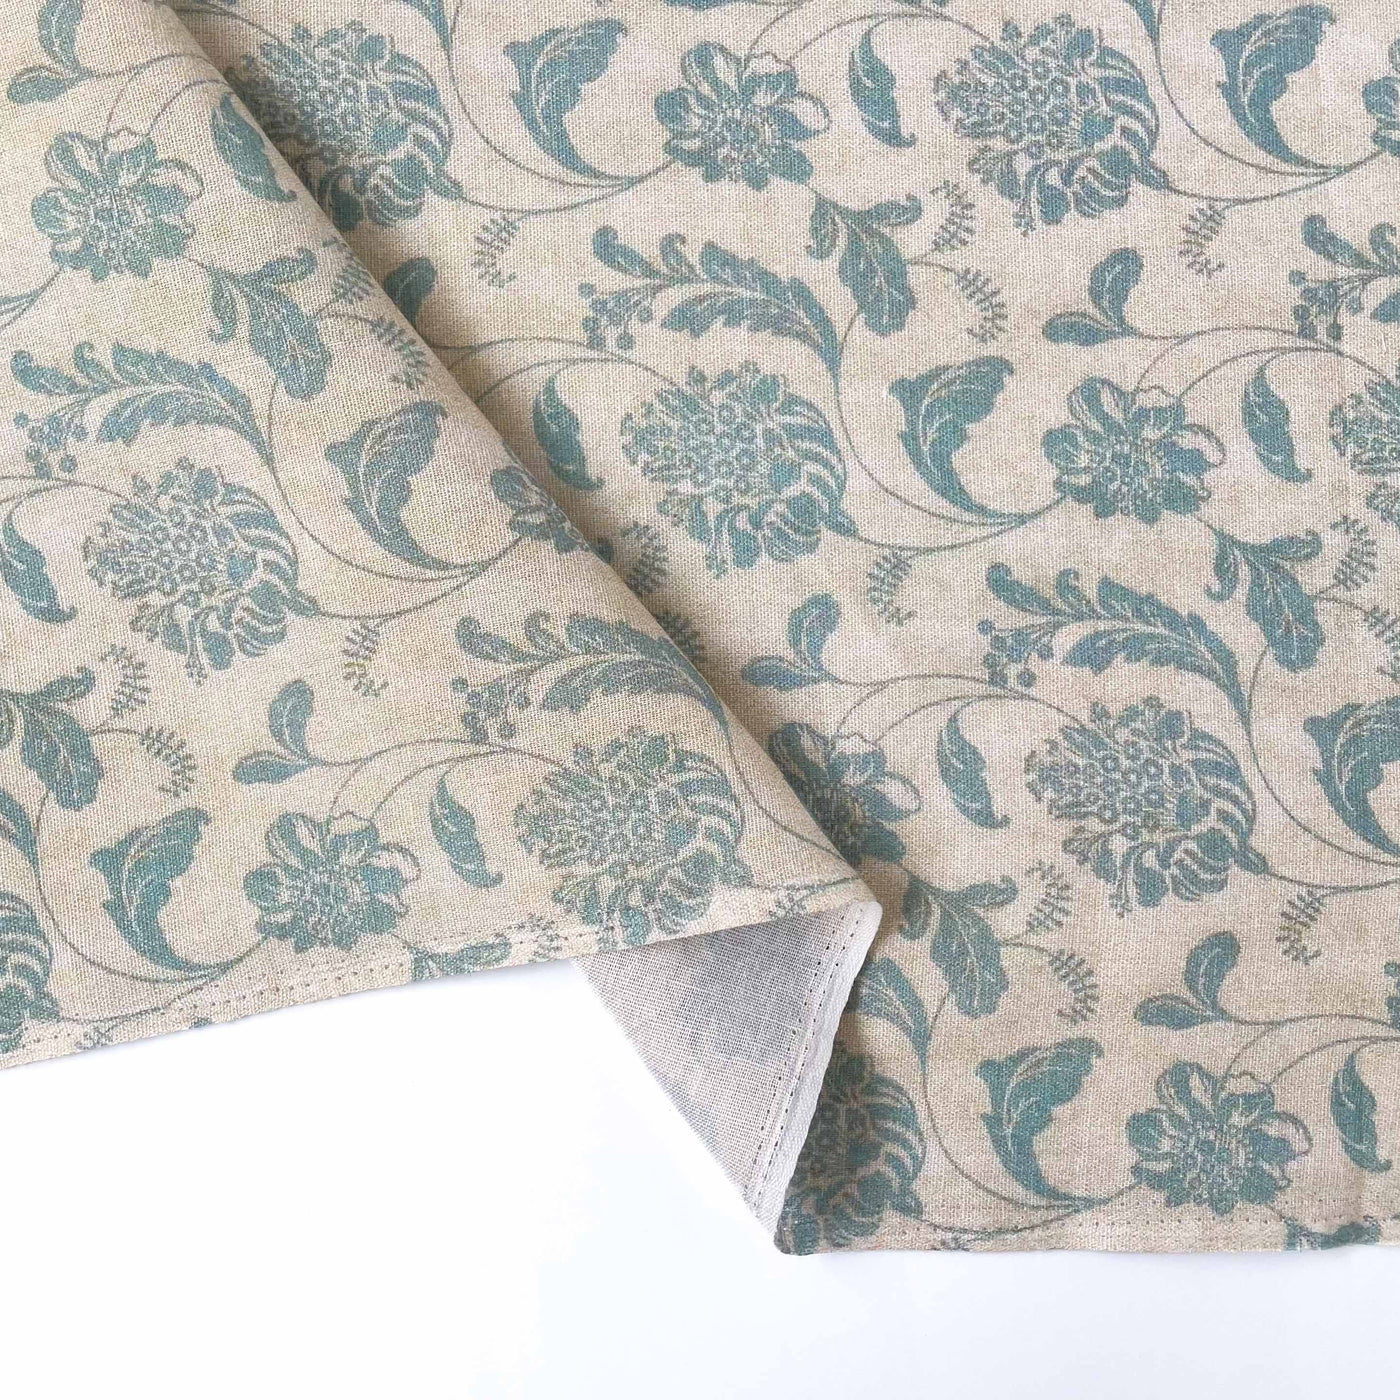 Printed Pure Cotton Linen Fabric Fabric Unisex Dusty Beige & Blue Vintage Blooms Printed Pure Cotton Linen Fabric (Width 44 Inches)